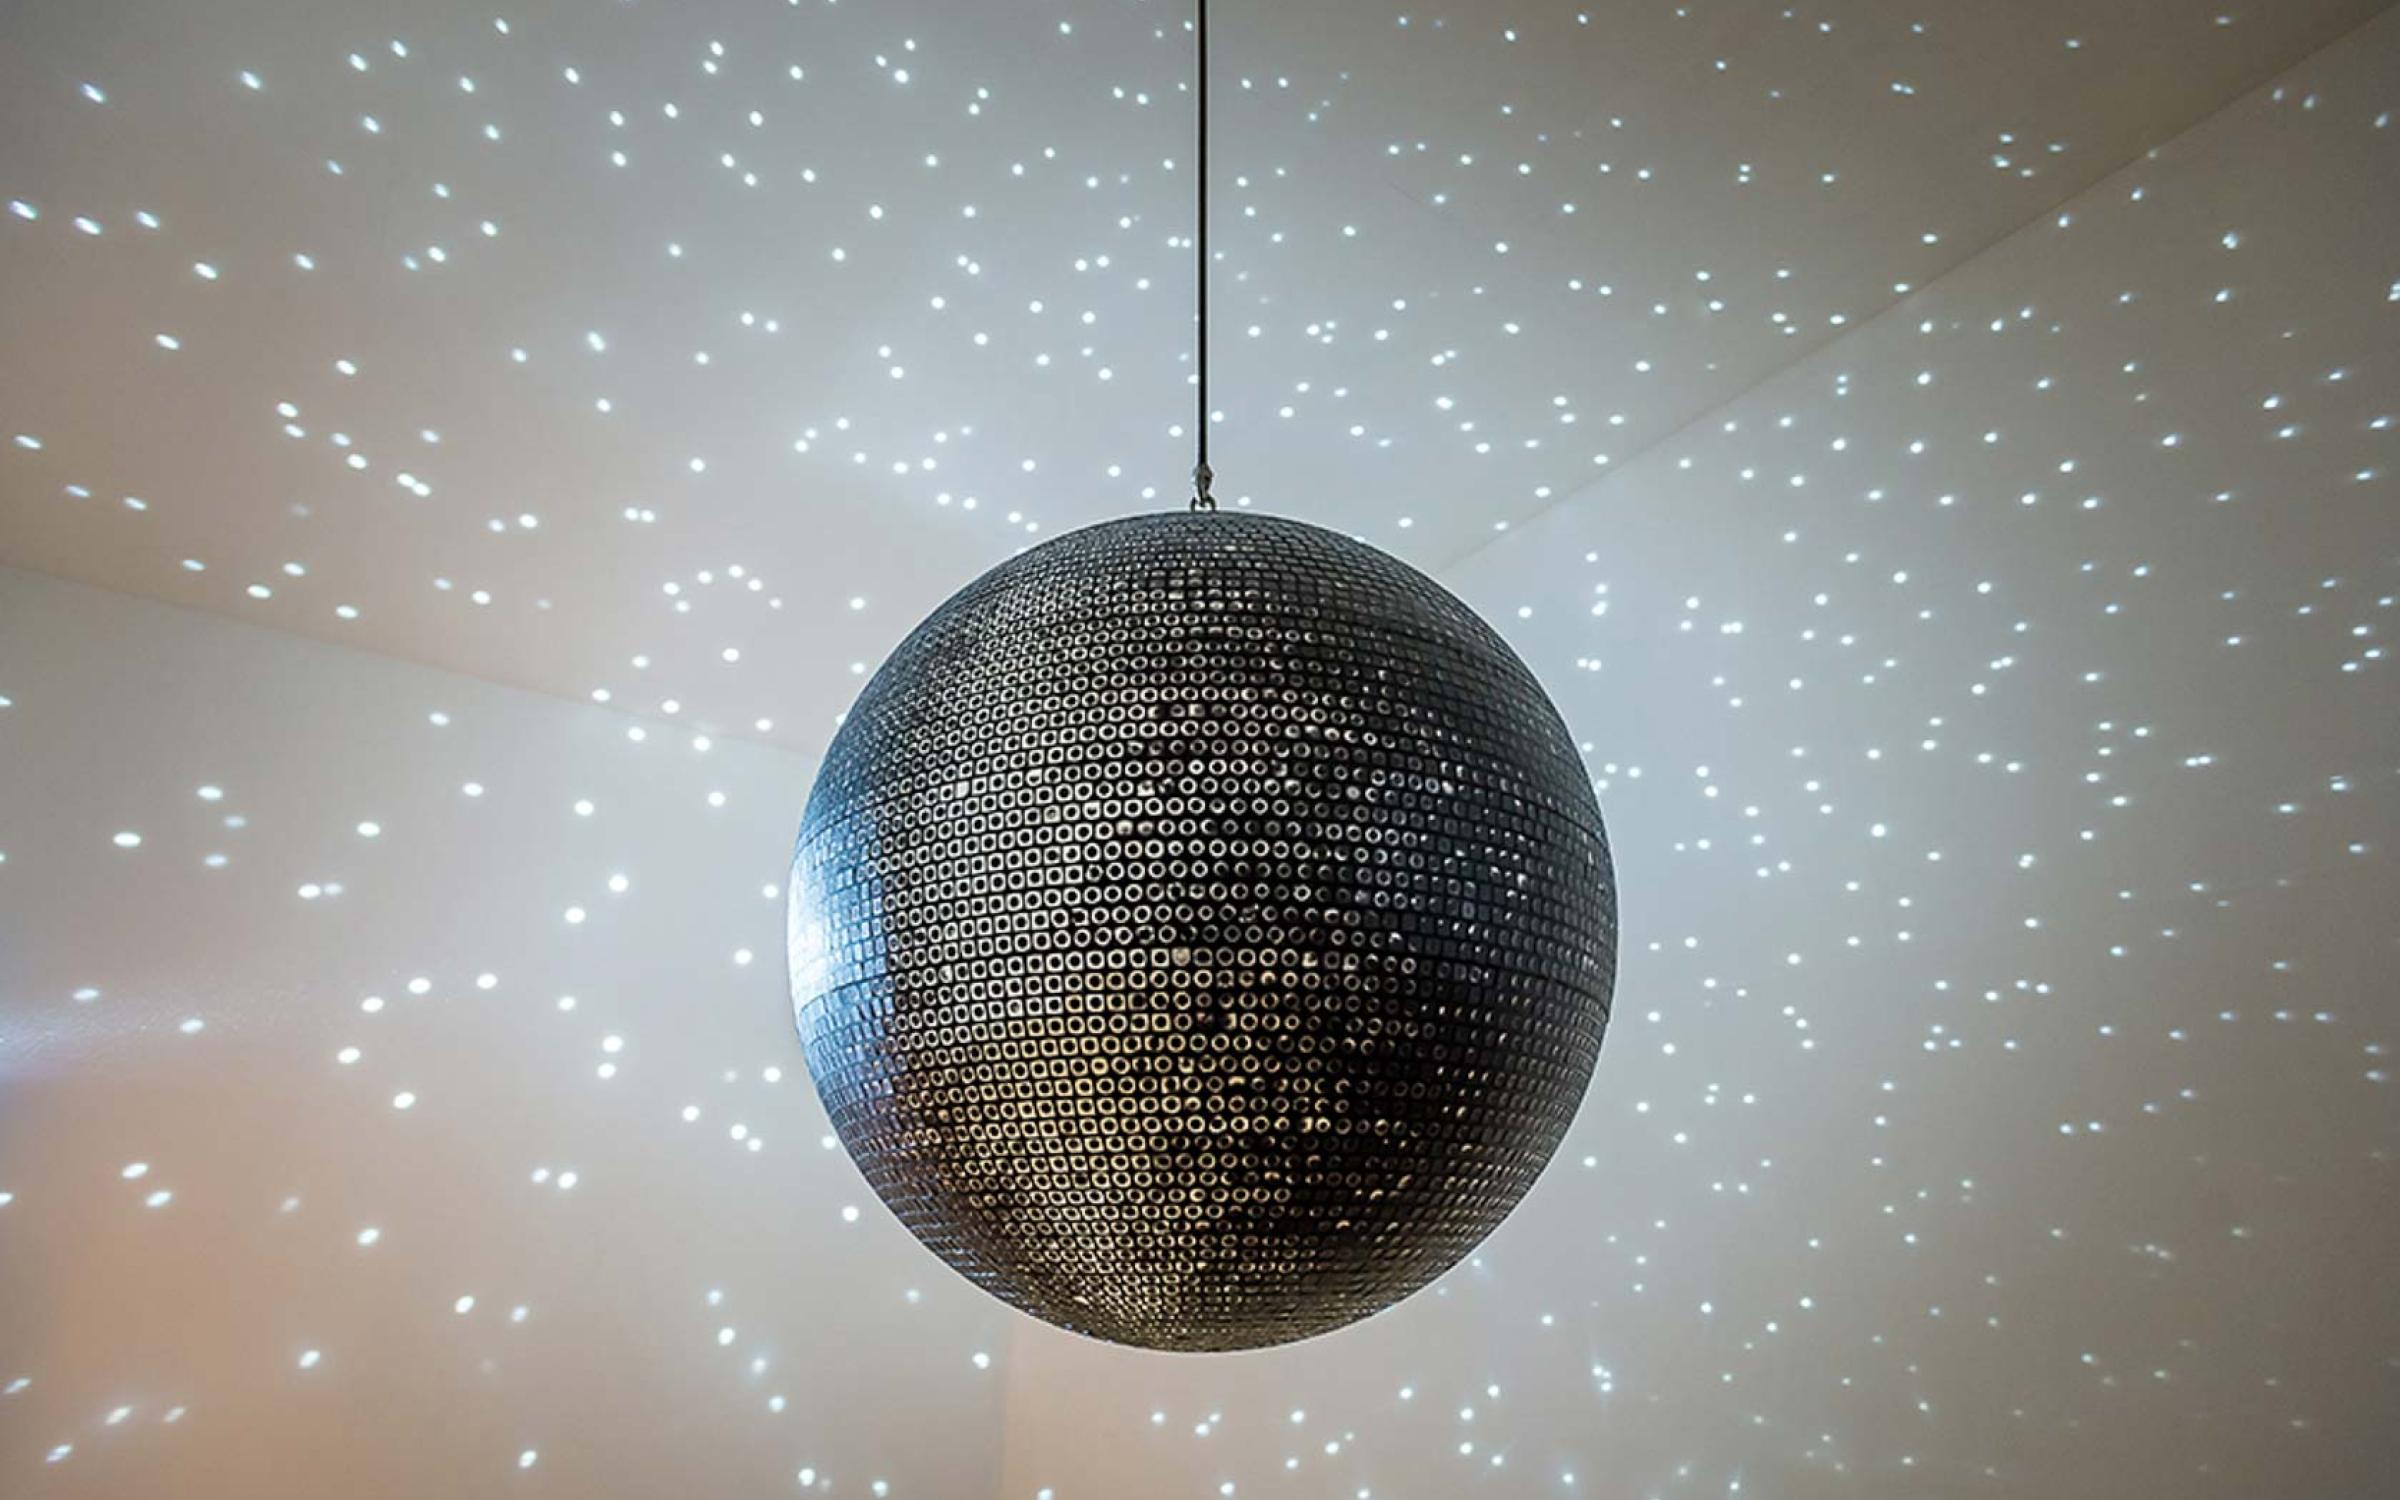 Katie Paterson (Scottish, born 1981), Totality, 2016, printed mirrorball, motor, and lights, 85 cm in diameter, photo © Ben Blackall, courtesy of the Lowry